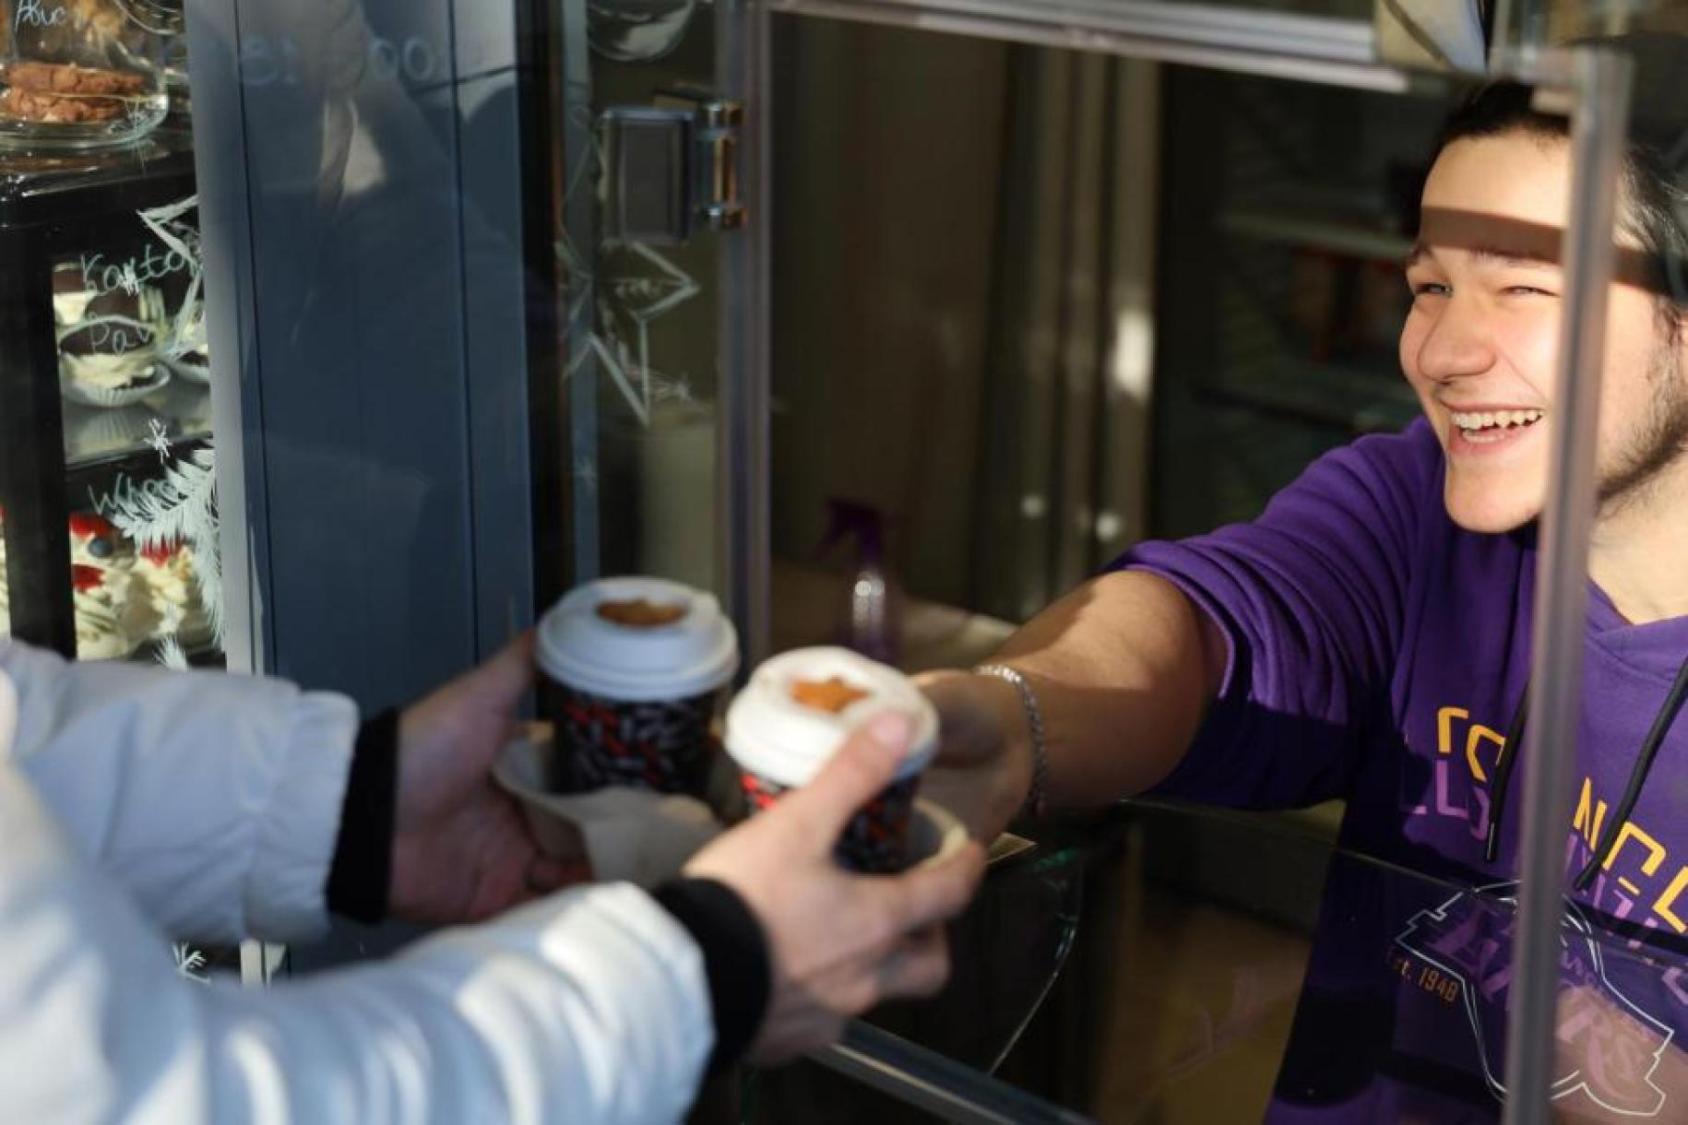 A man in a purple shirt smiles as he hands a cup of coffee to a customer in a kiosk